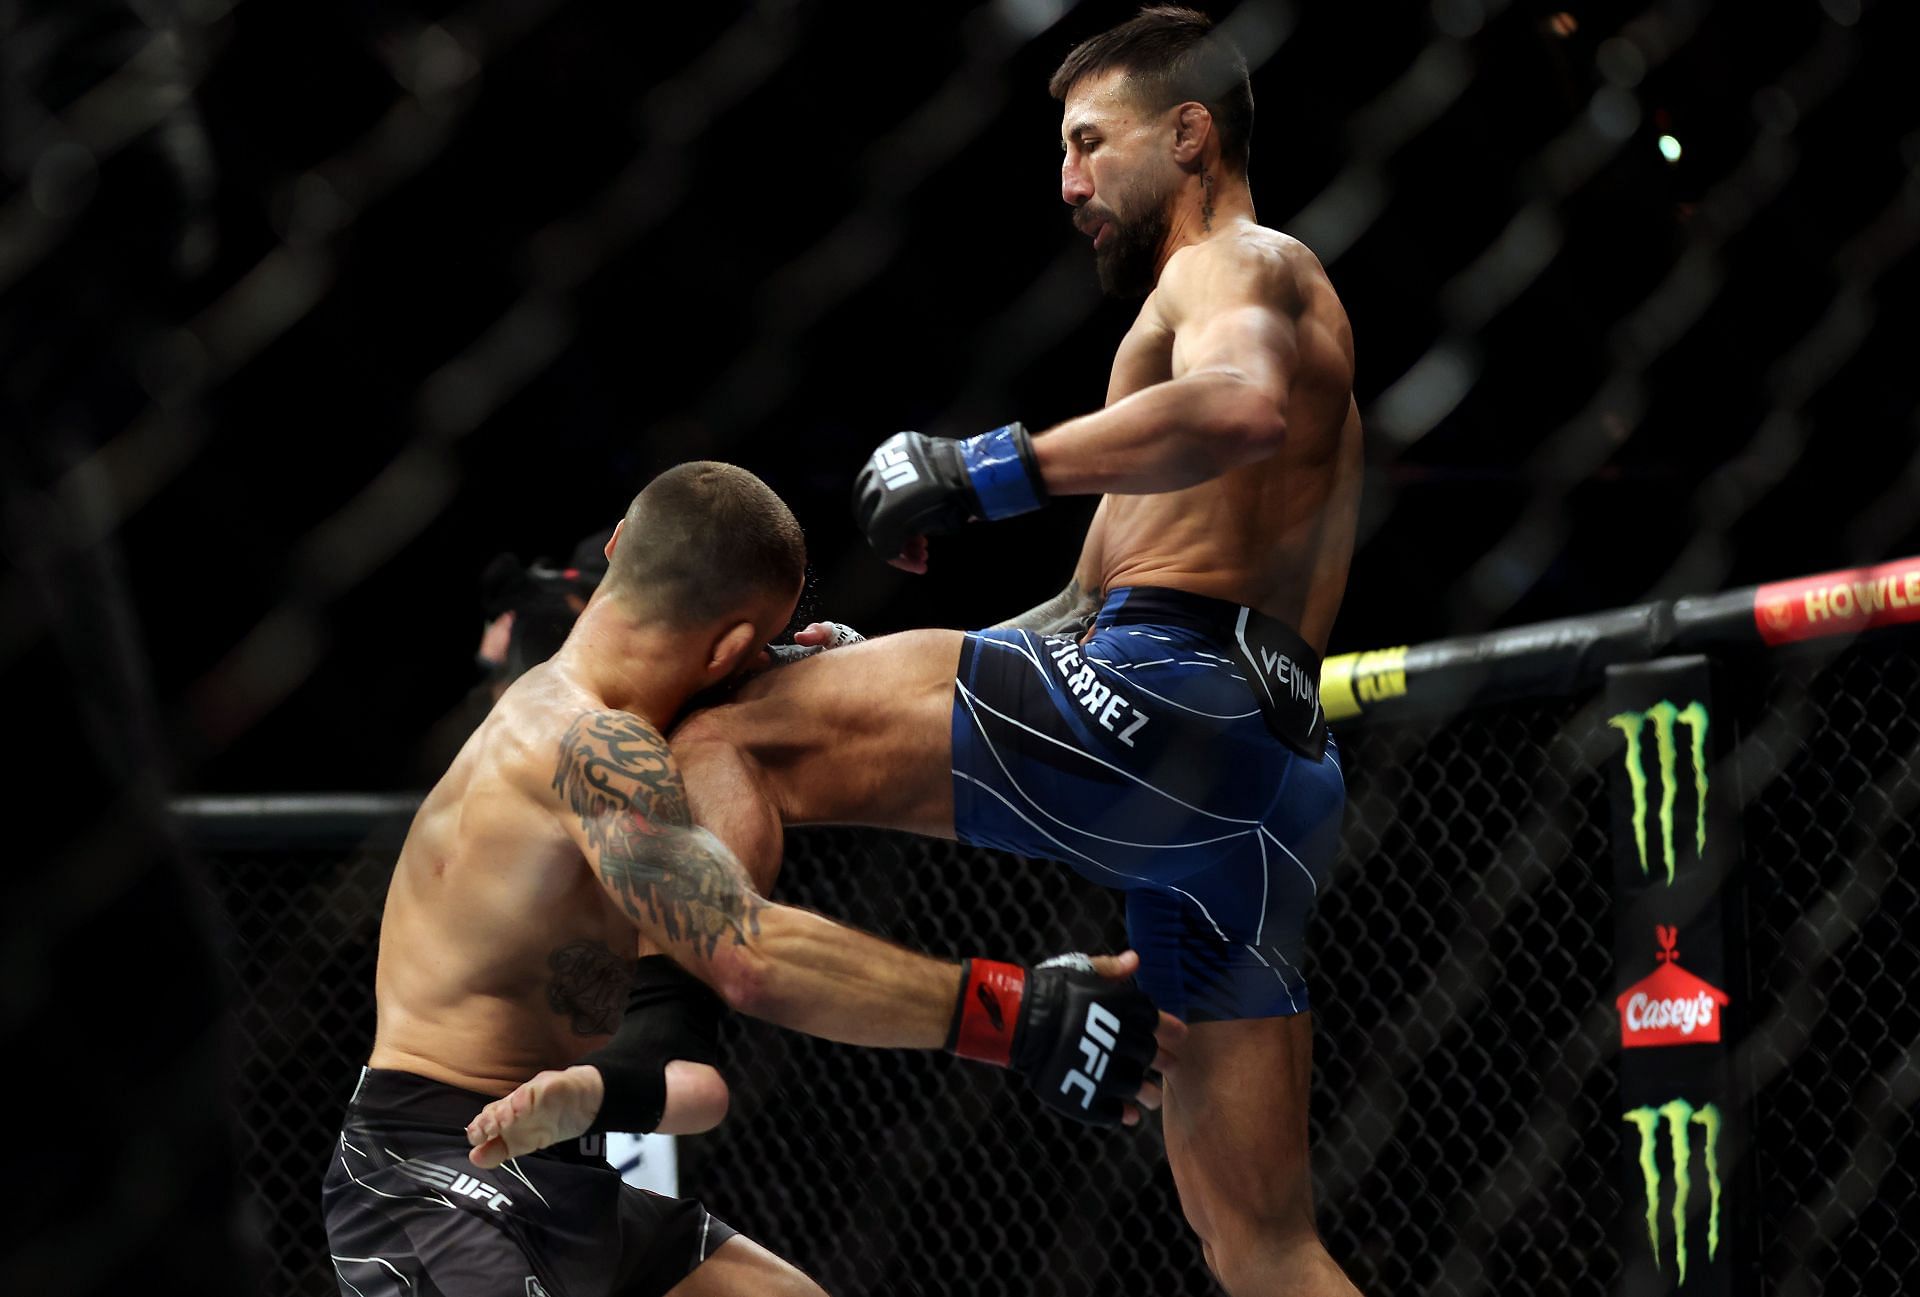 After his knockout of Frankie Edgar, can Chris Gutierrez continue his rise at 135lbs?